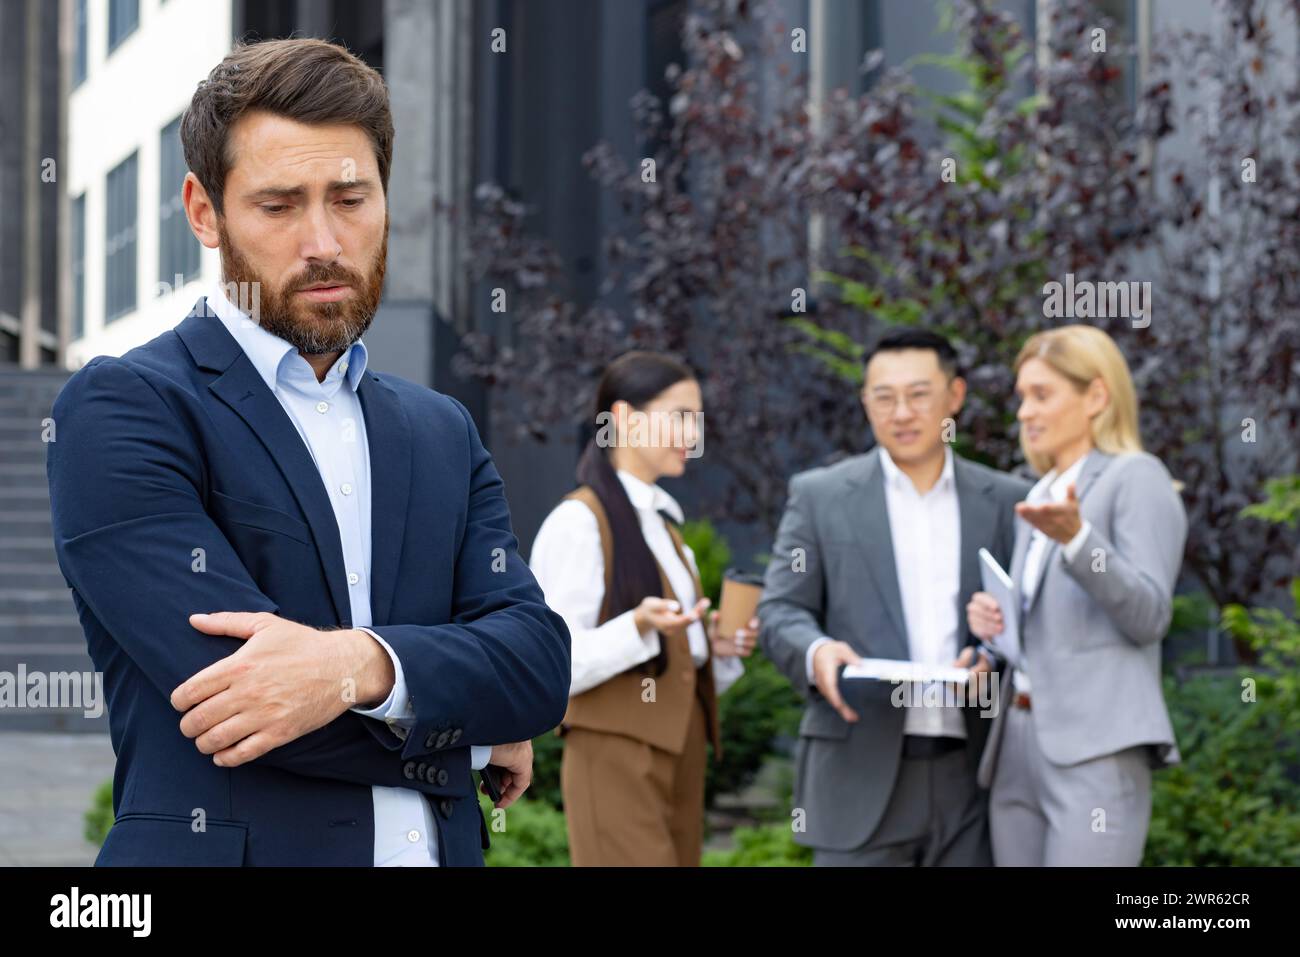 Bullying at work. Upset man standing outside office center with hands folded and head bowed, women and men team laughing at him and discussing behind his back. Stock Photo